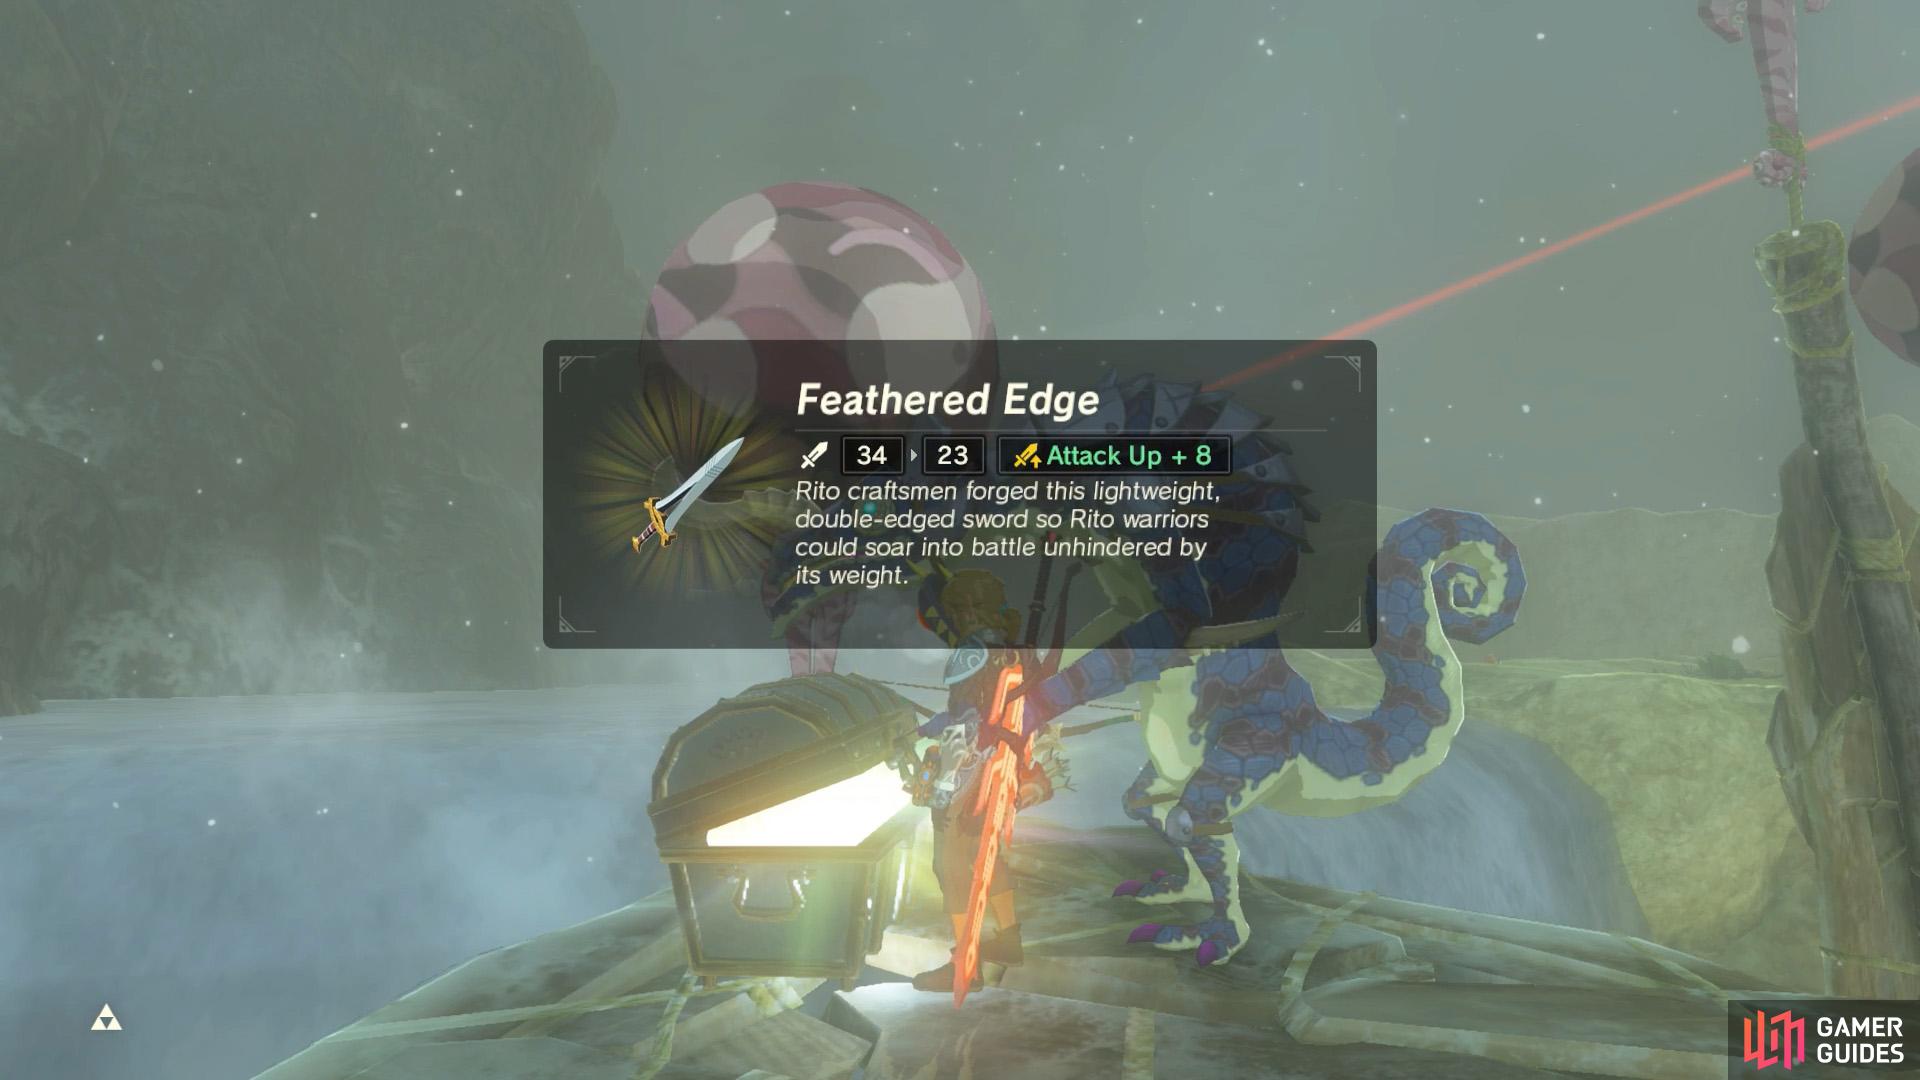 The chest next to the Lizalfos has a Feathered Edge.